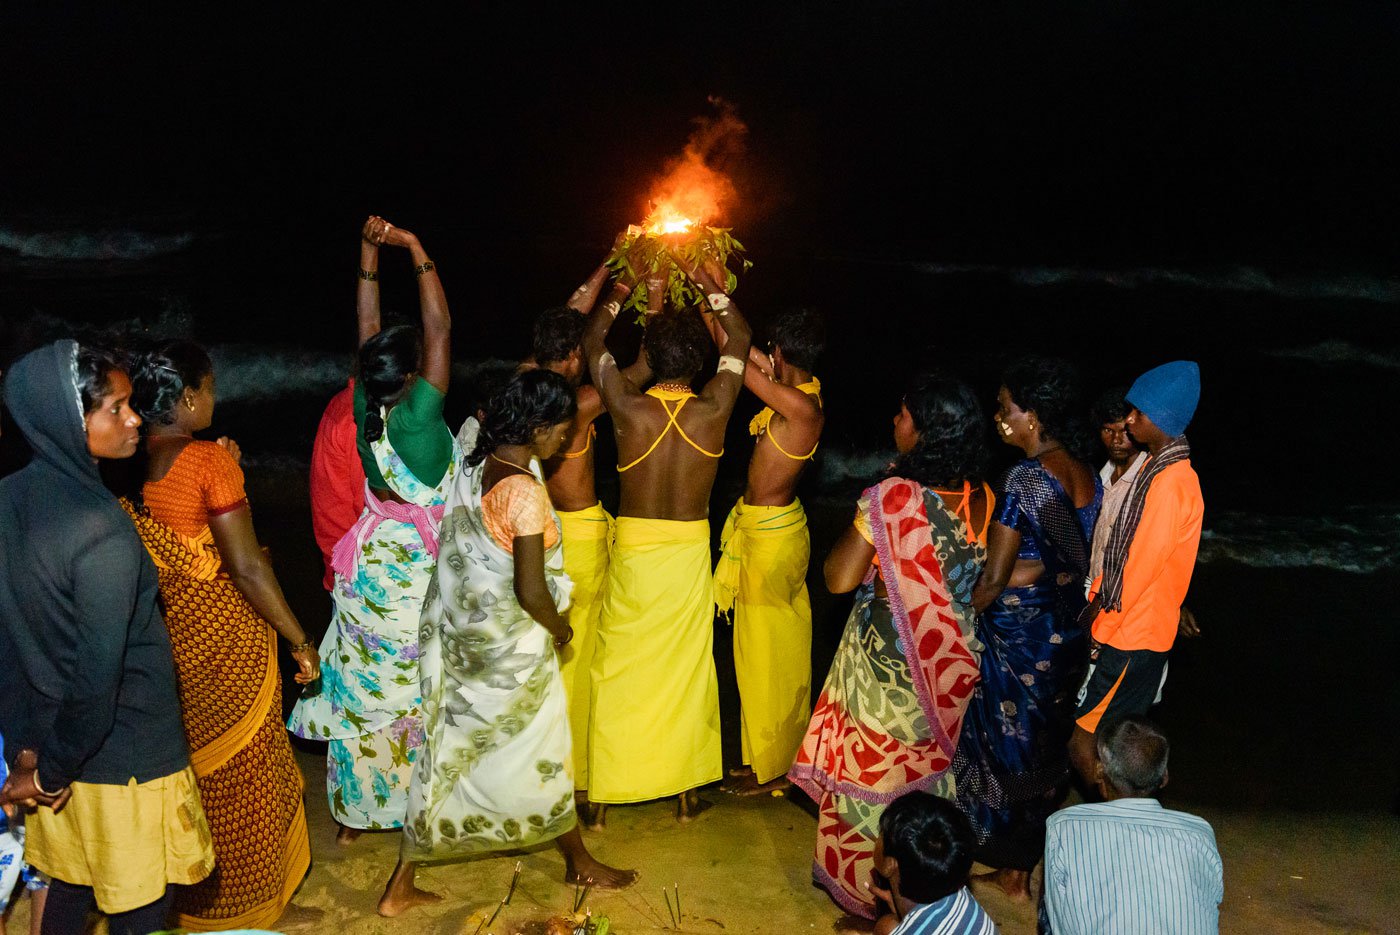 Prayers begin several hours before sunrise. Many of the devotees are dressed traditionally in yellow or orange clothes